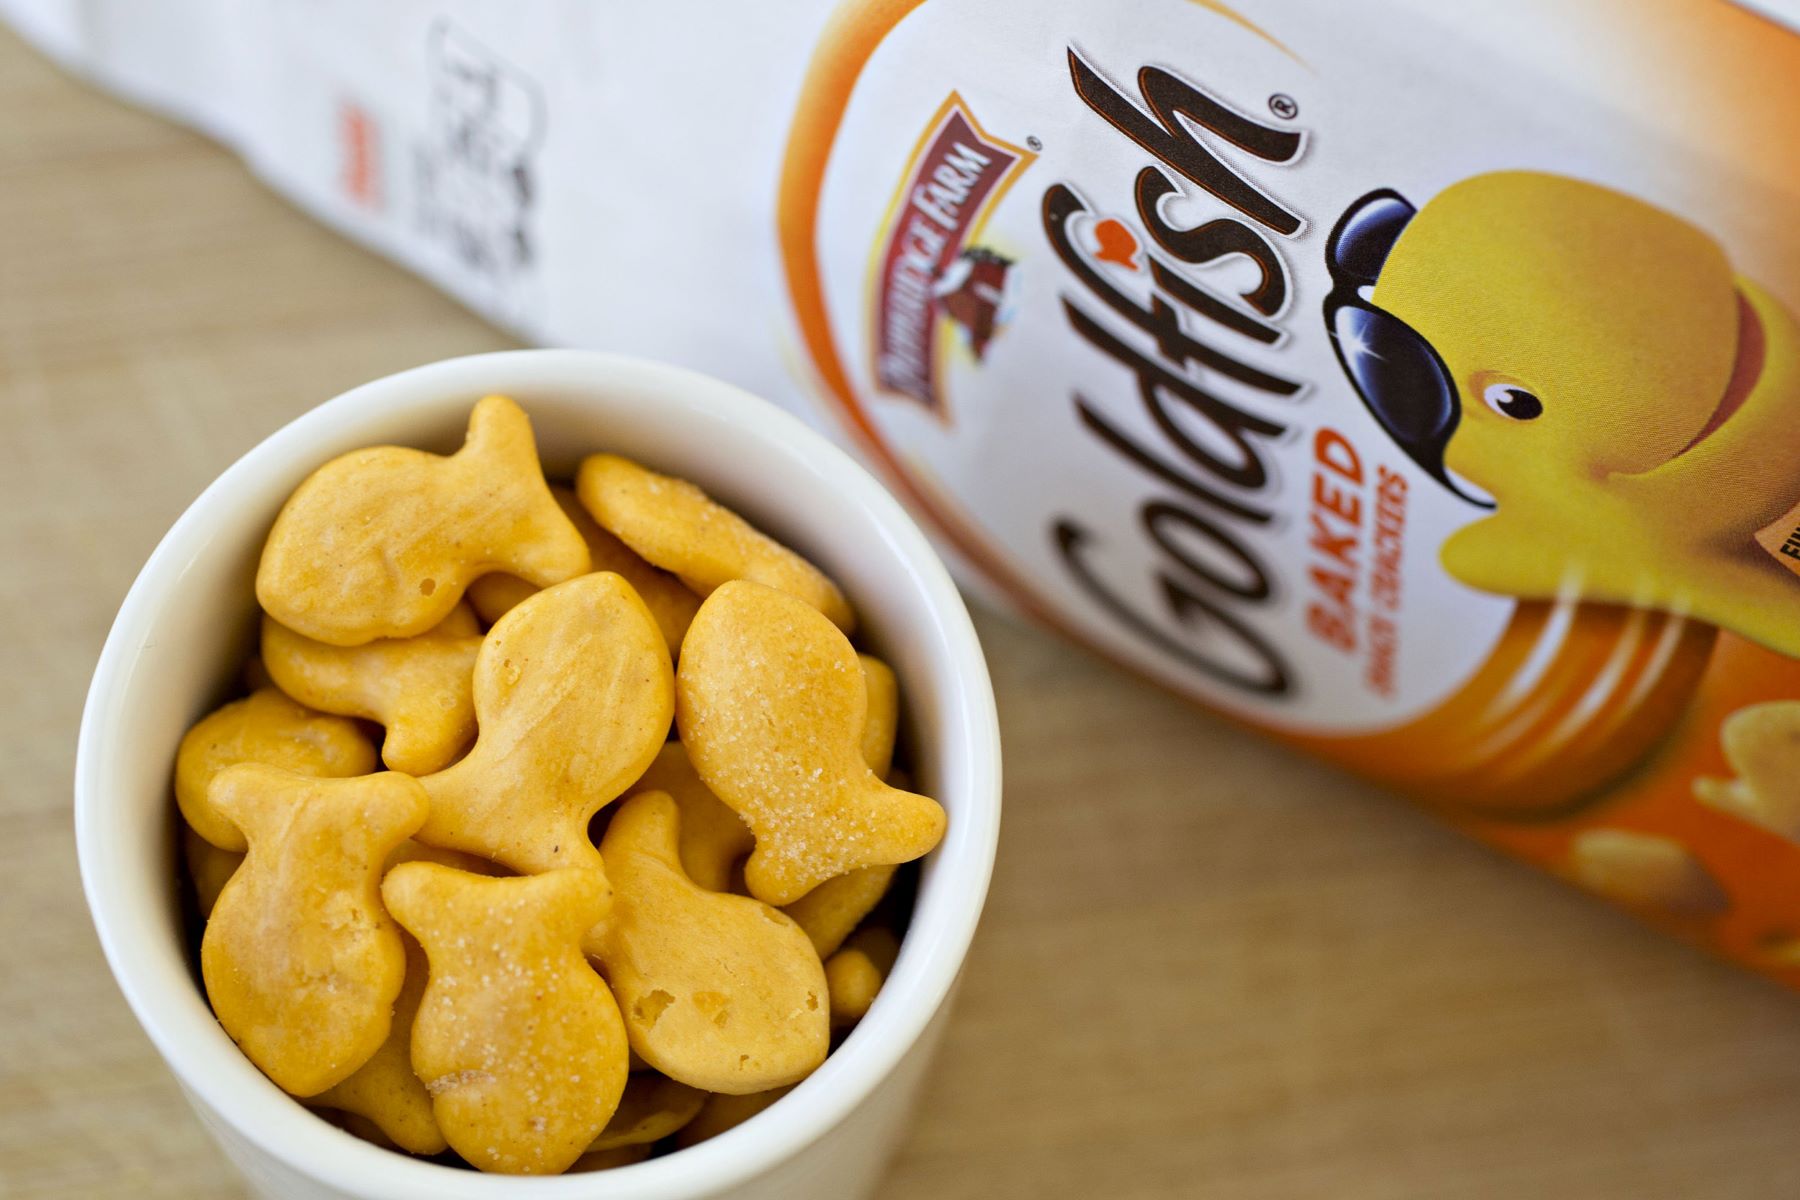 The Surprising Snack Choice Of Vegetarians: Goldfish Crackers